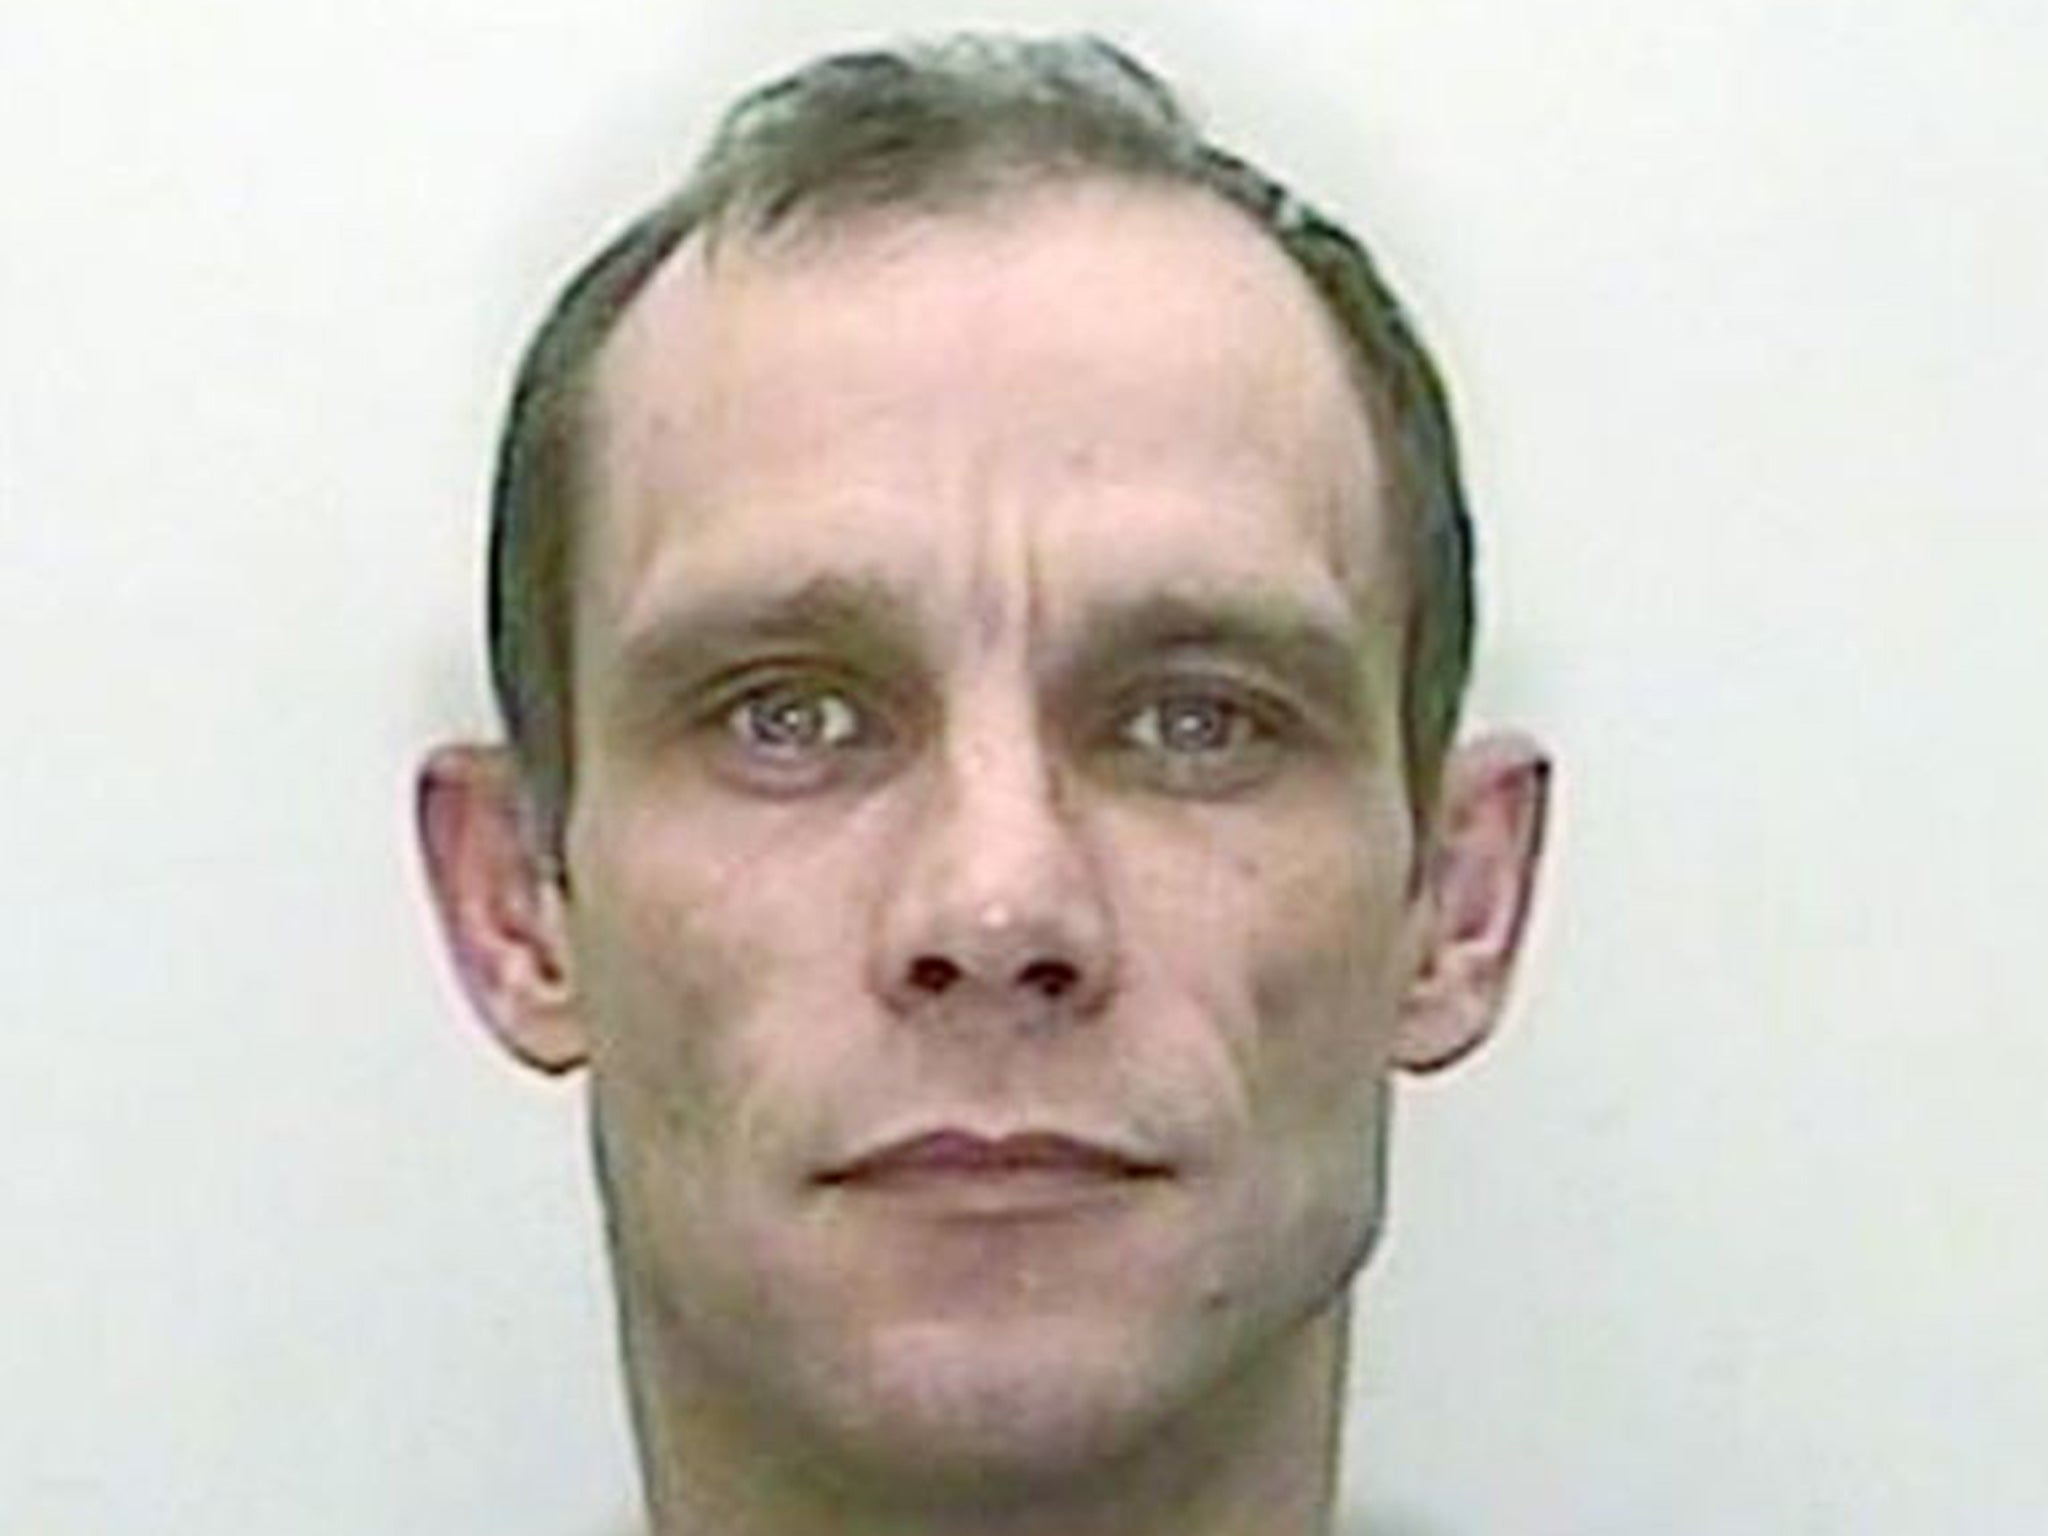 Christopher Halliwell is in prison serving a life-long sentence